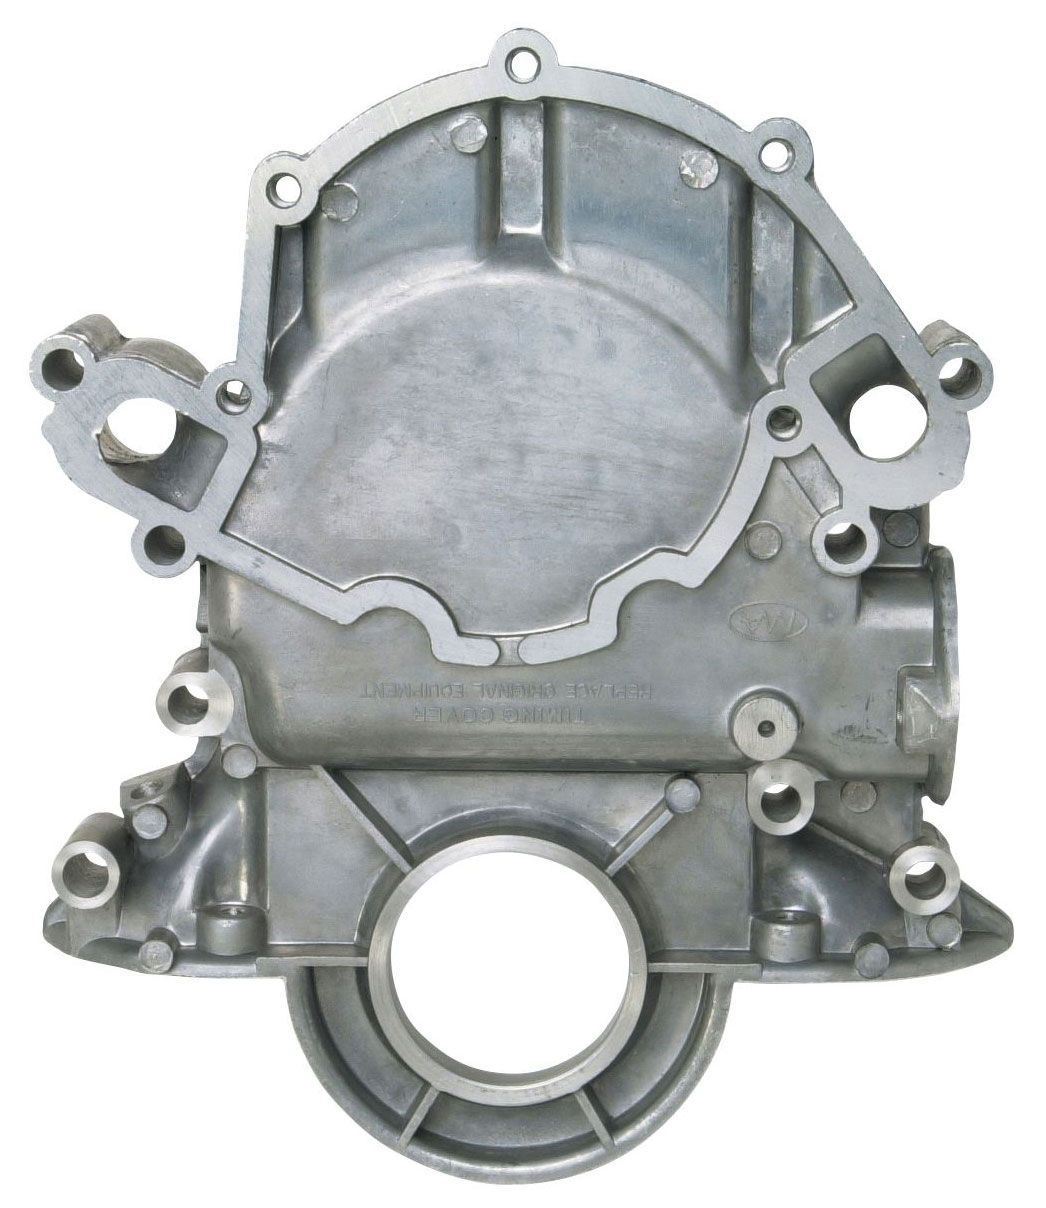 ED4250 - TIMING COVER ALLOY FORD WIND